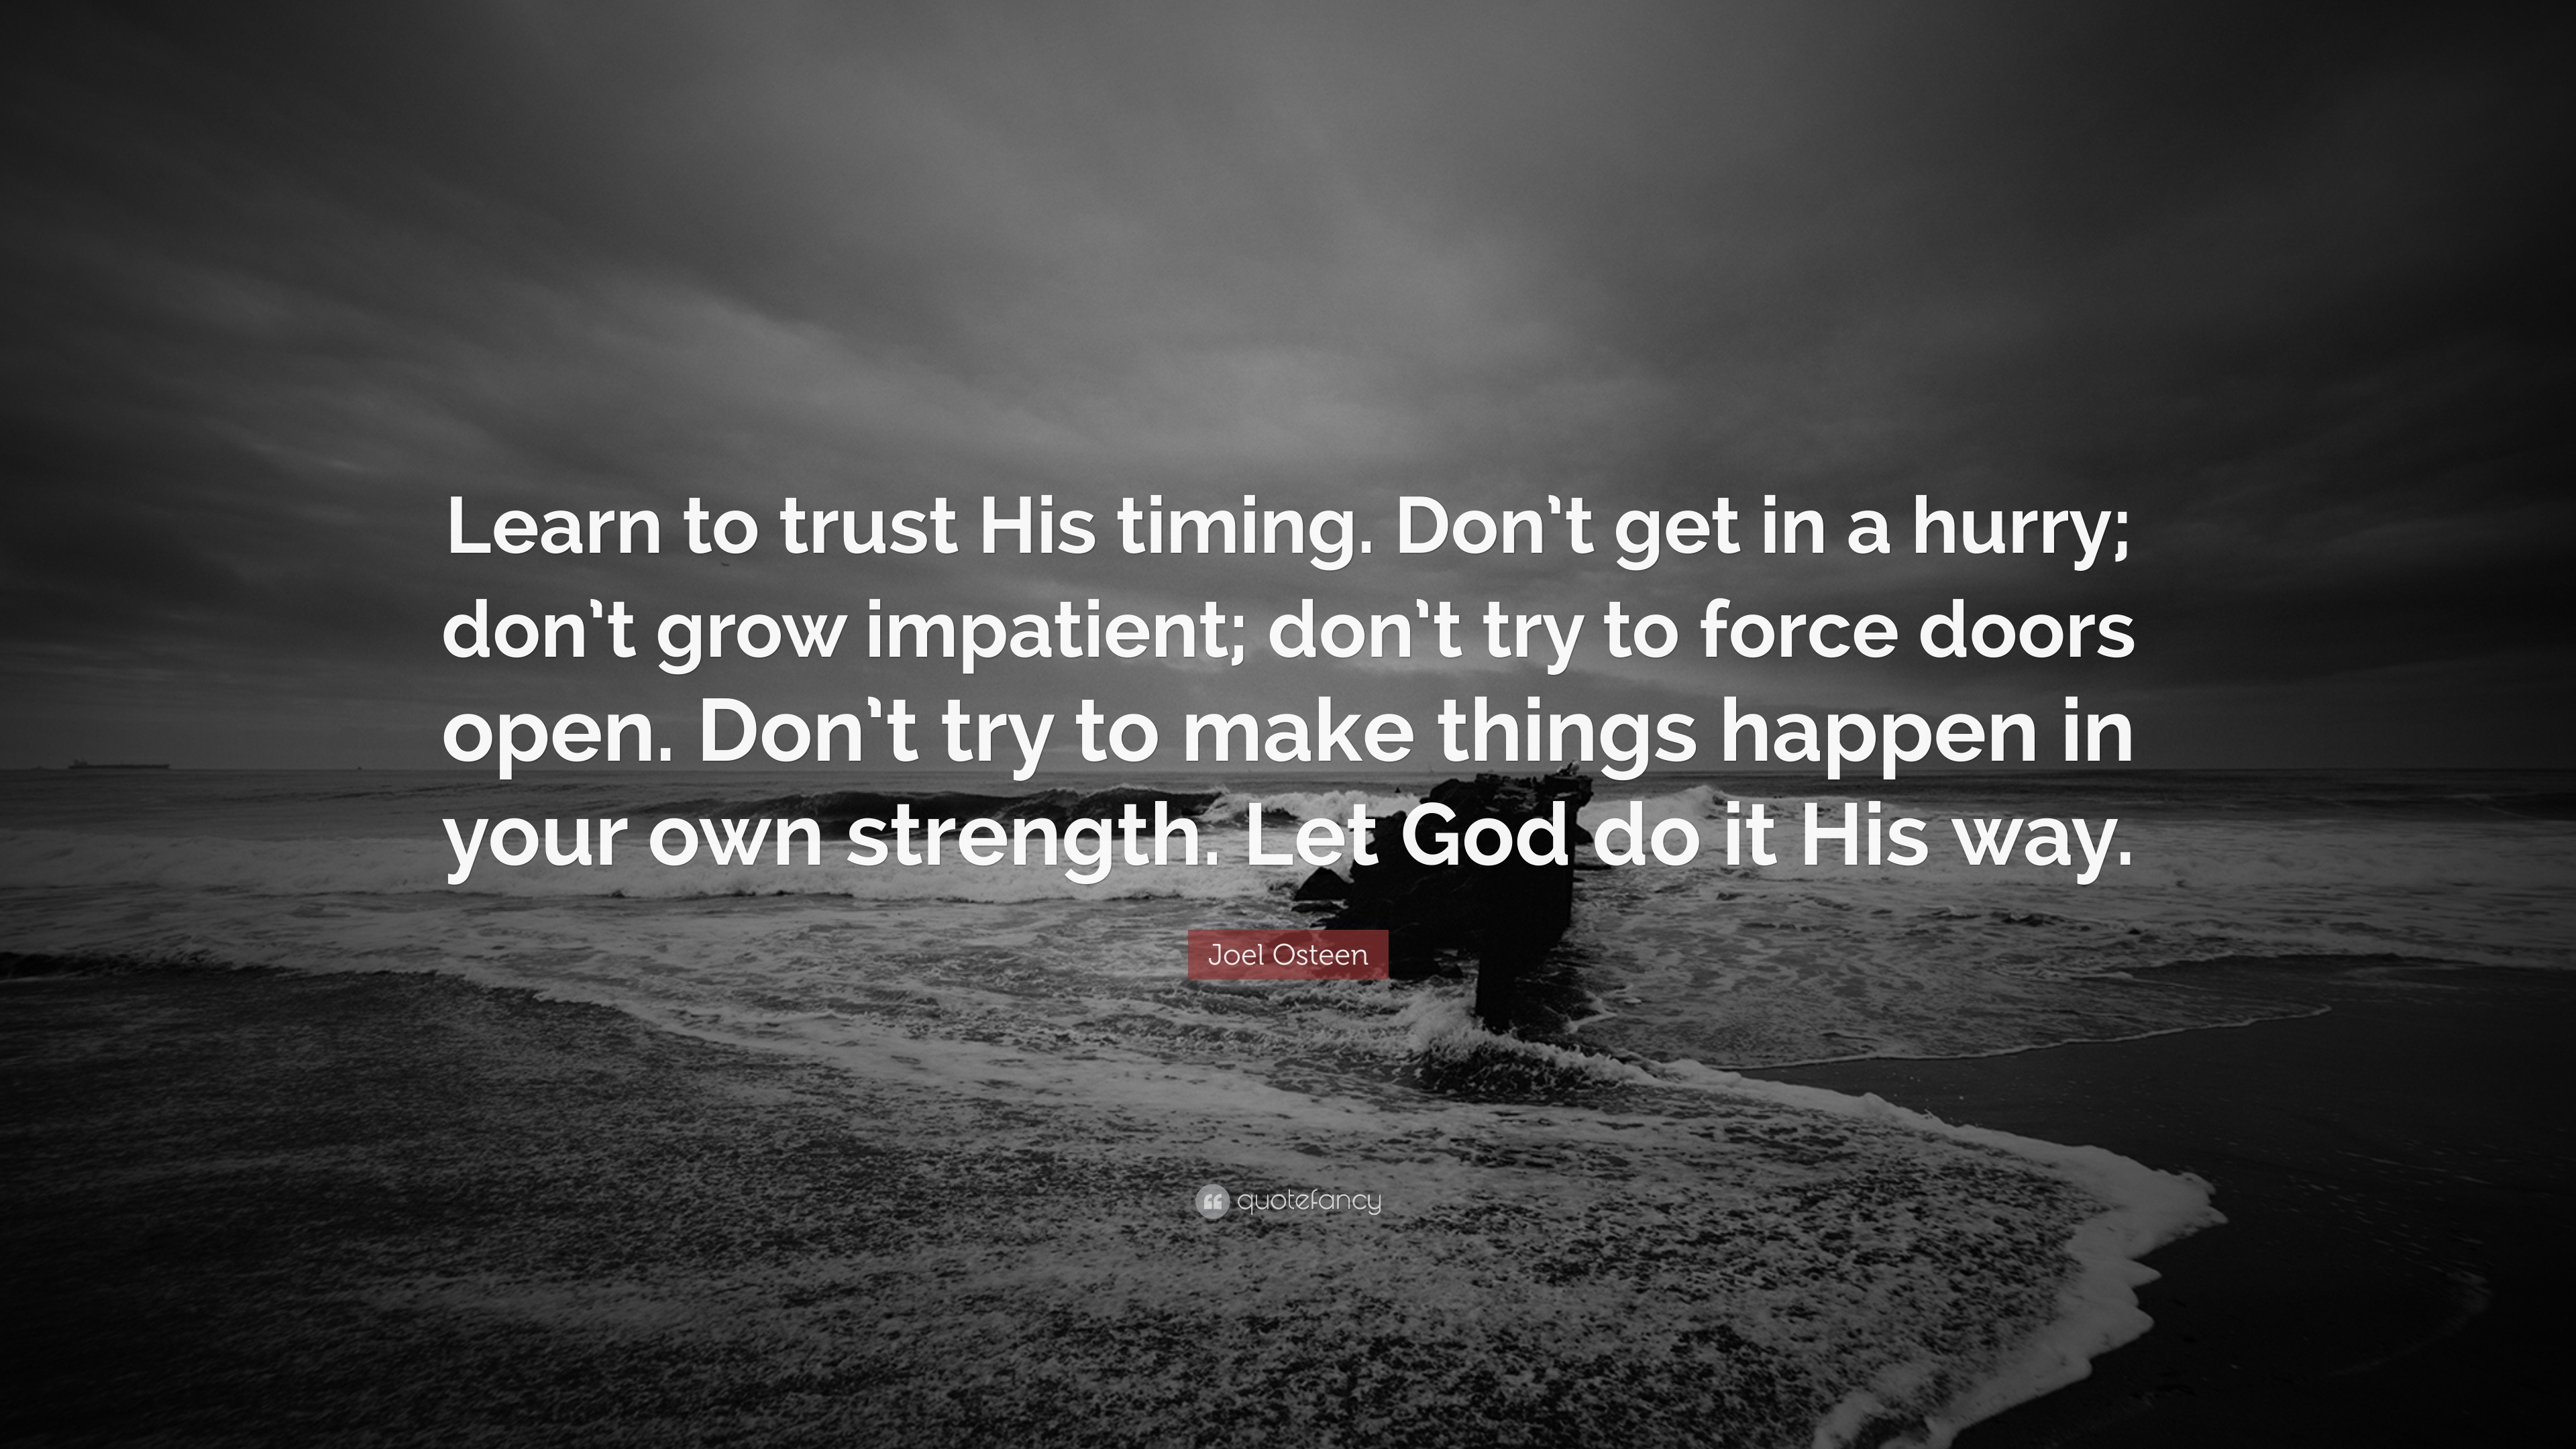 Joel Osteen Quote “Learn to trust His timing Don t in